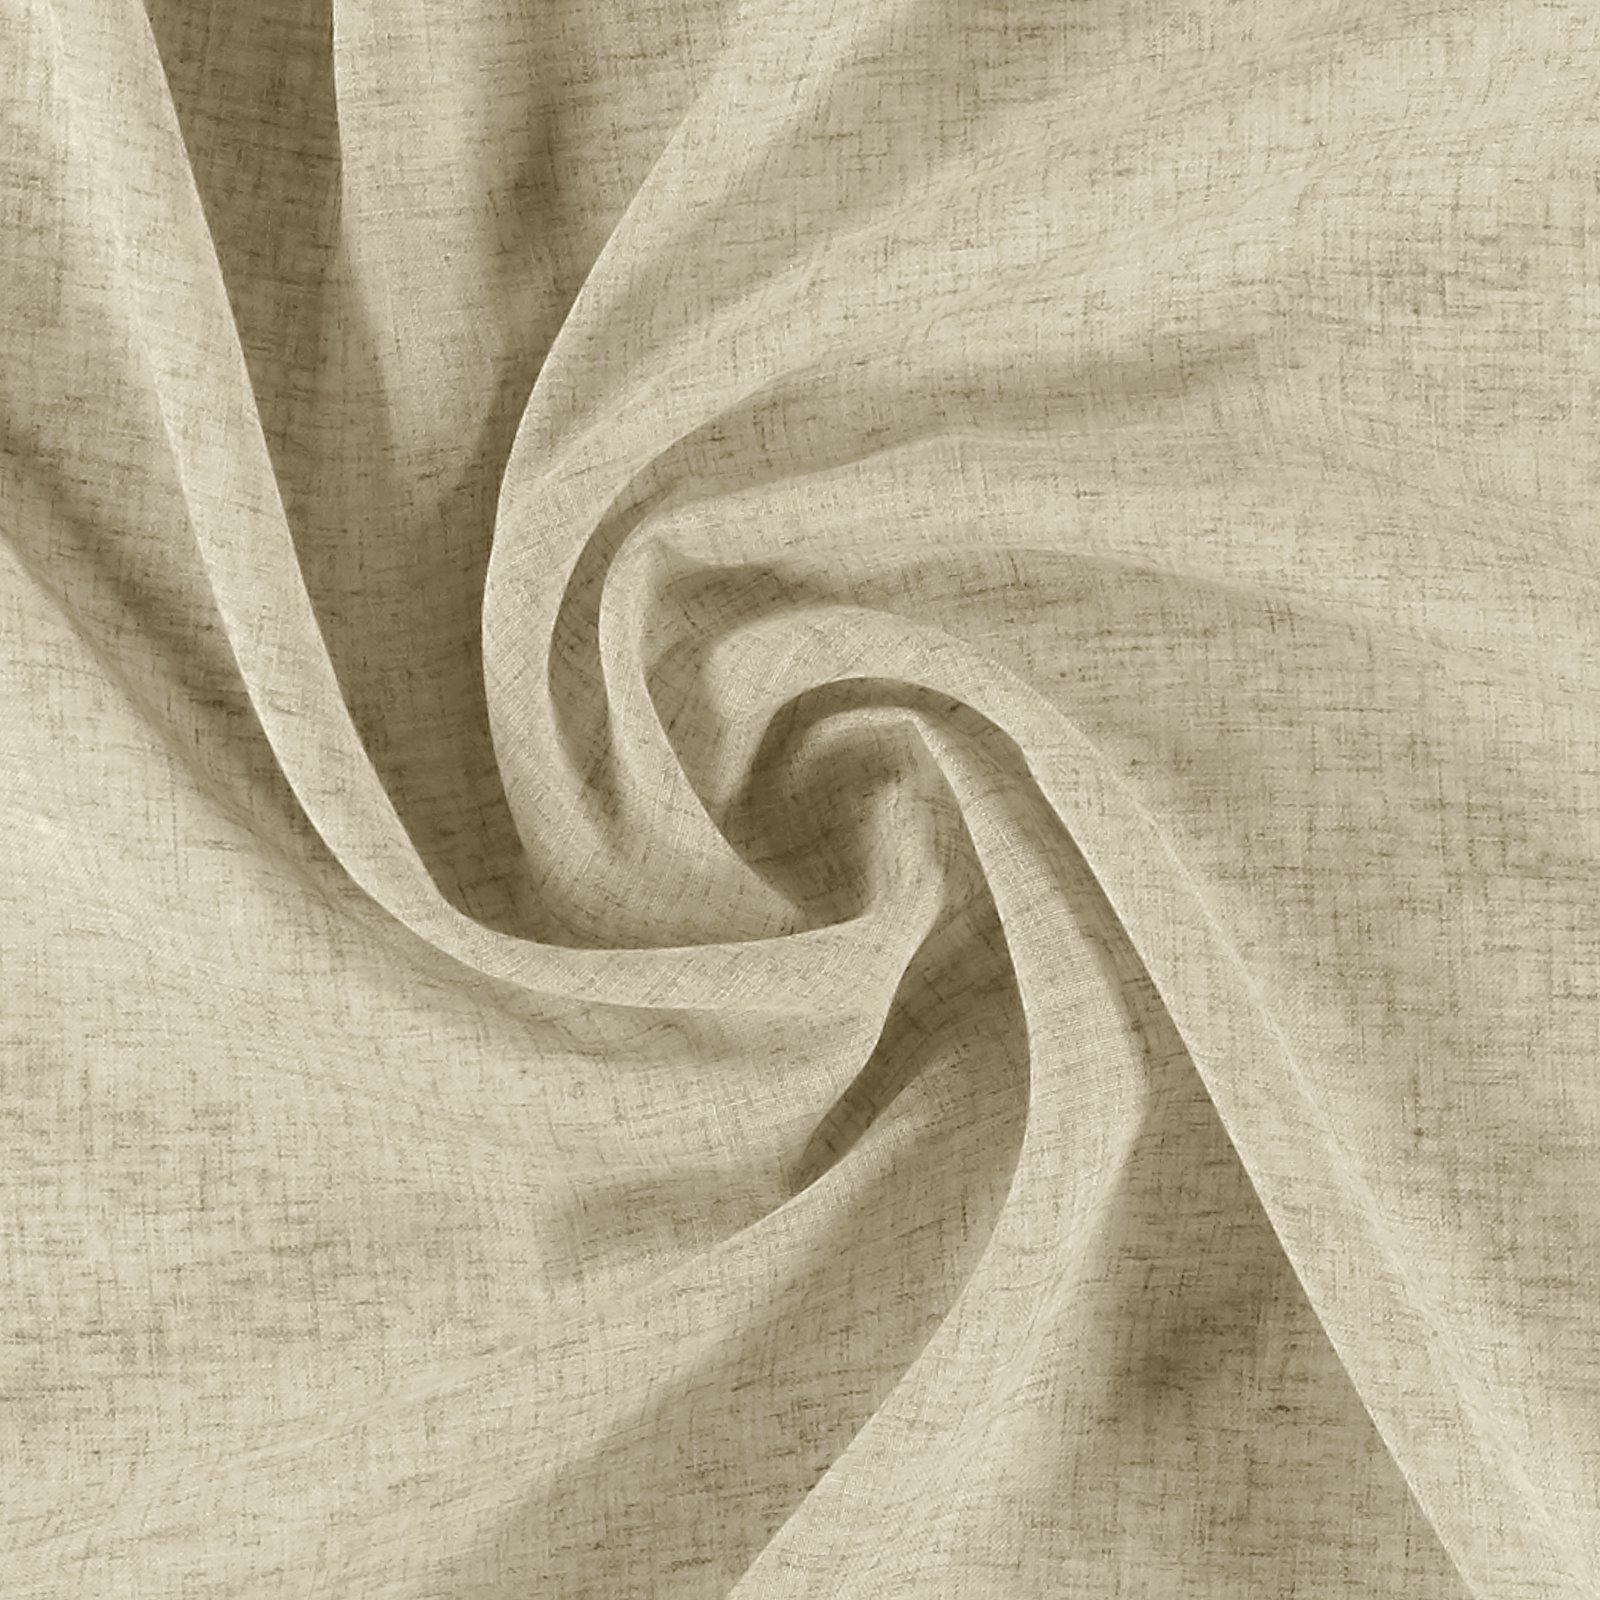 Voile mörk natur polyester/lin mix 295-300cm 835196_pack